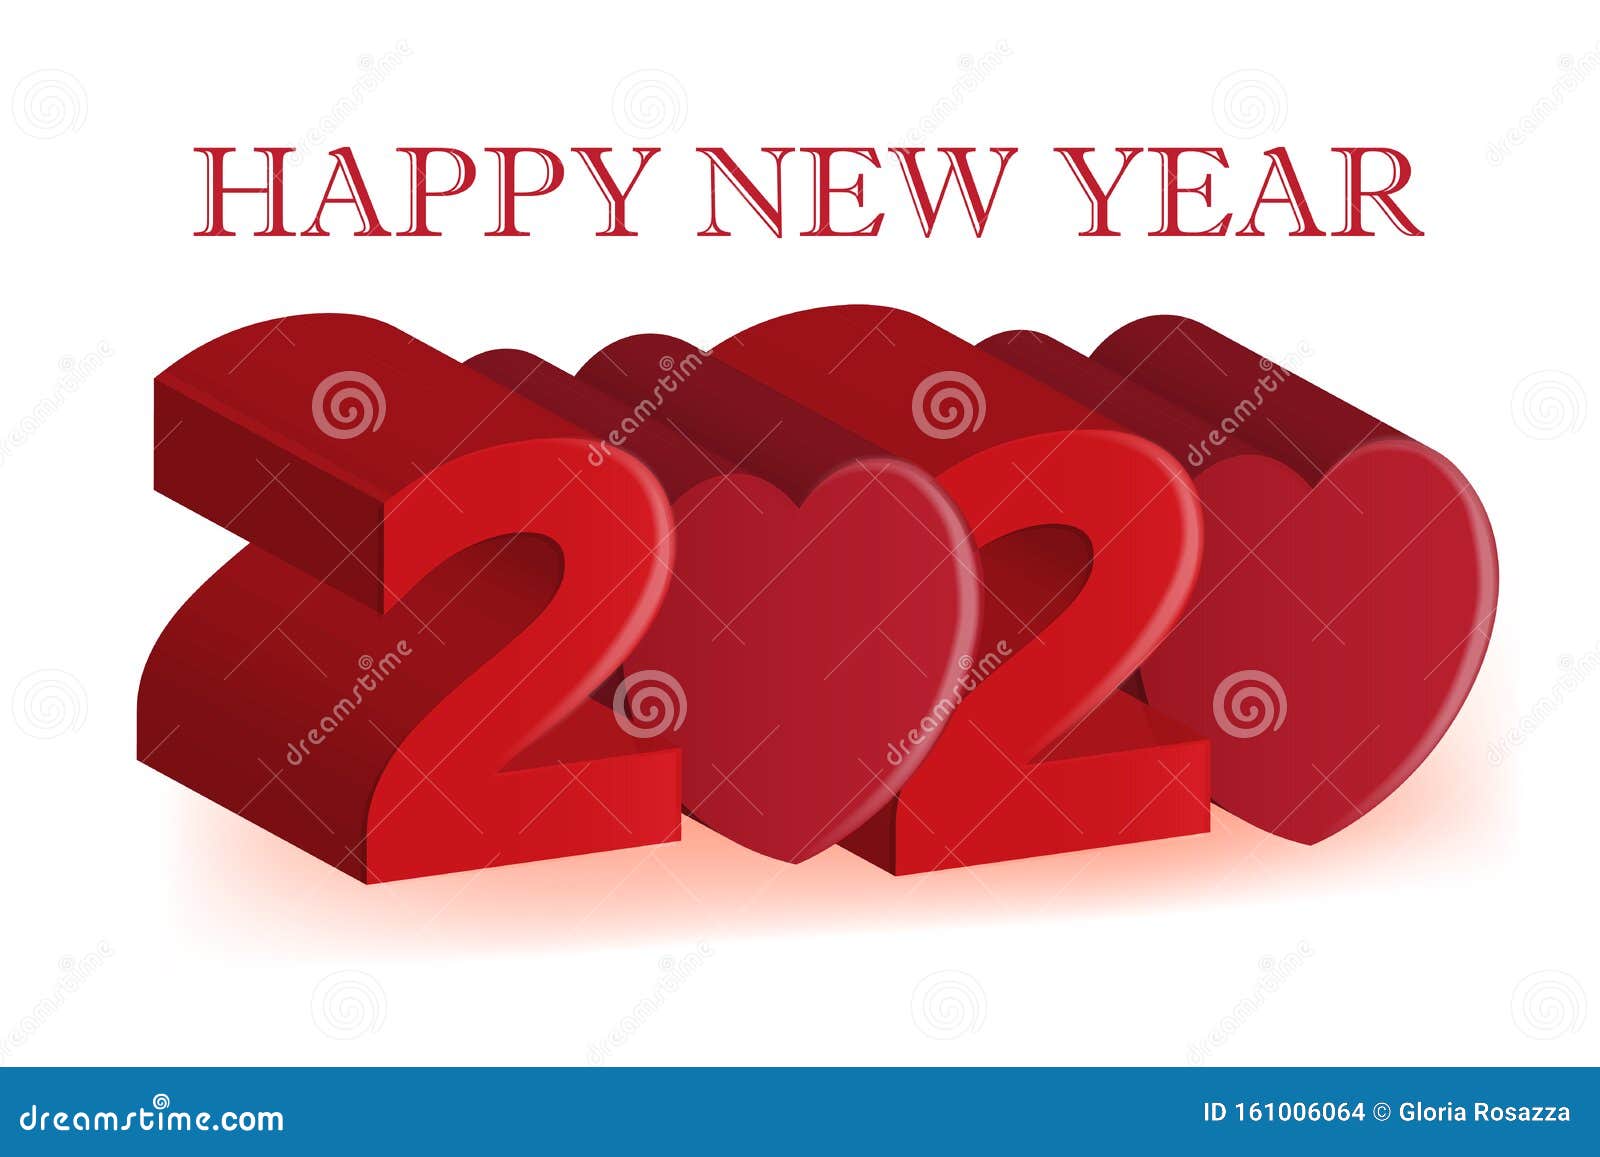 Happy 2020 New Year 3d Red Love Heart Party Celebration Card ...